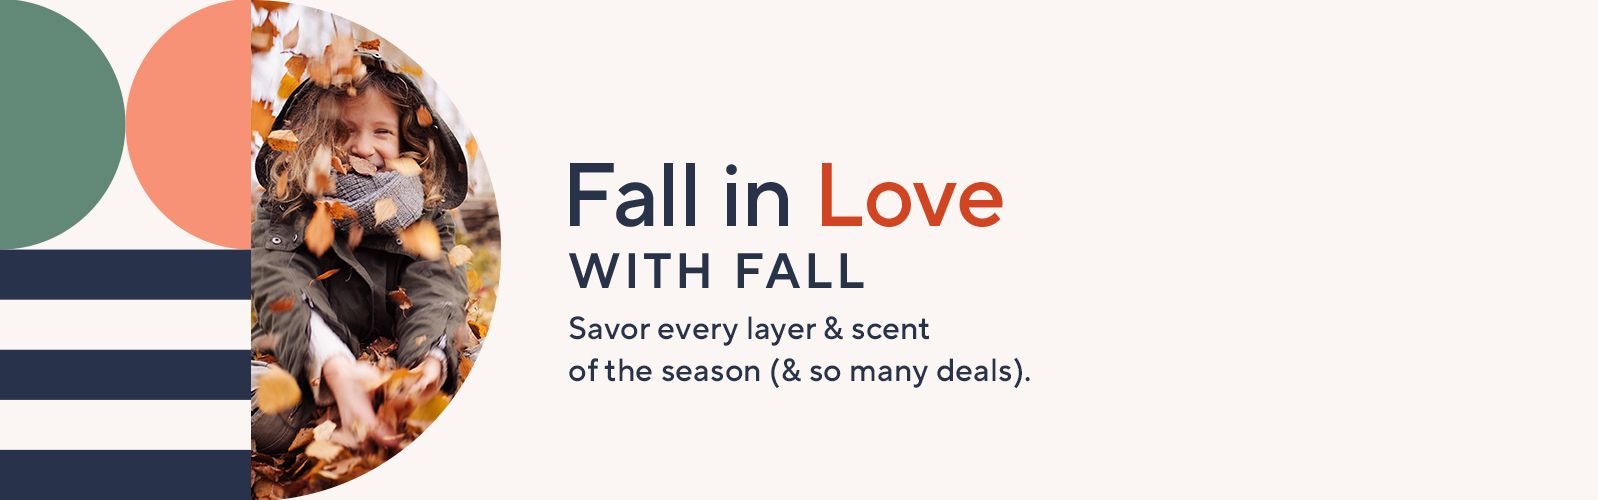 Fall in Love with Fall - Savor every layer & scent of the season (& so many deals).